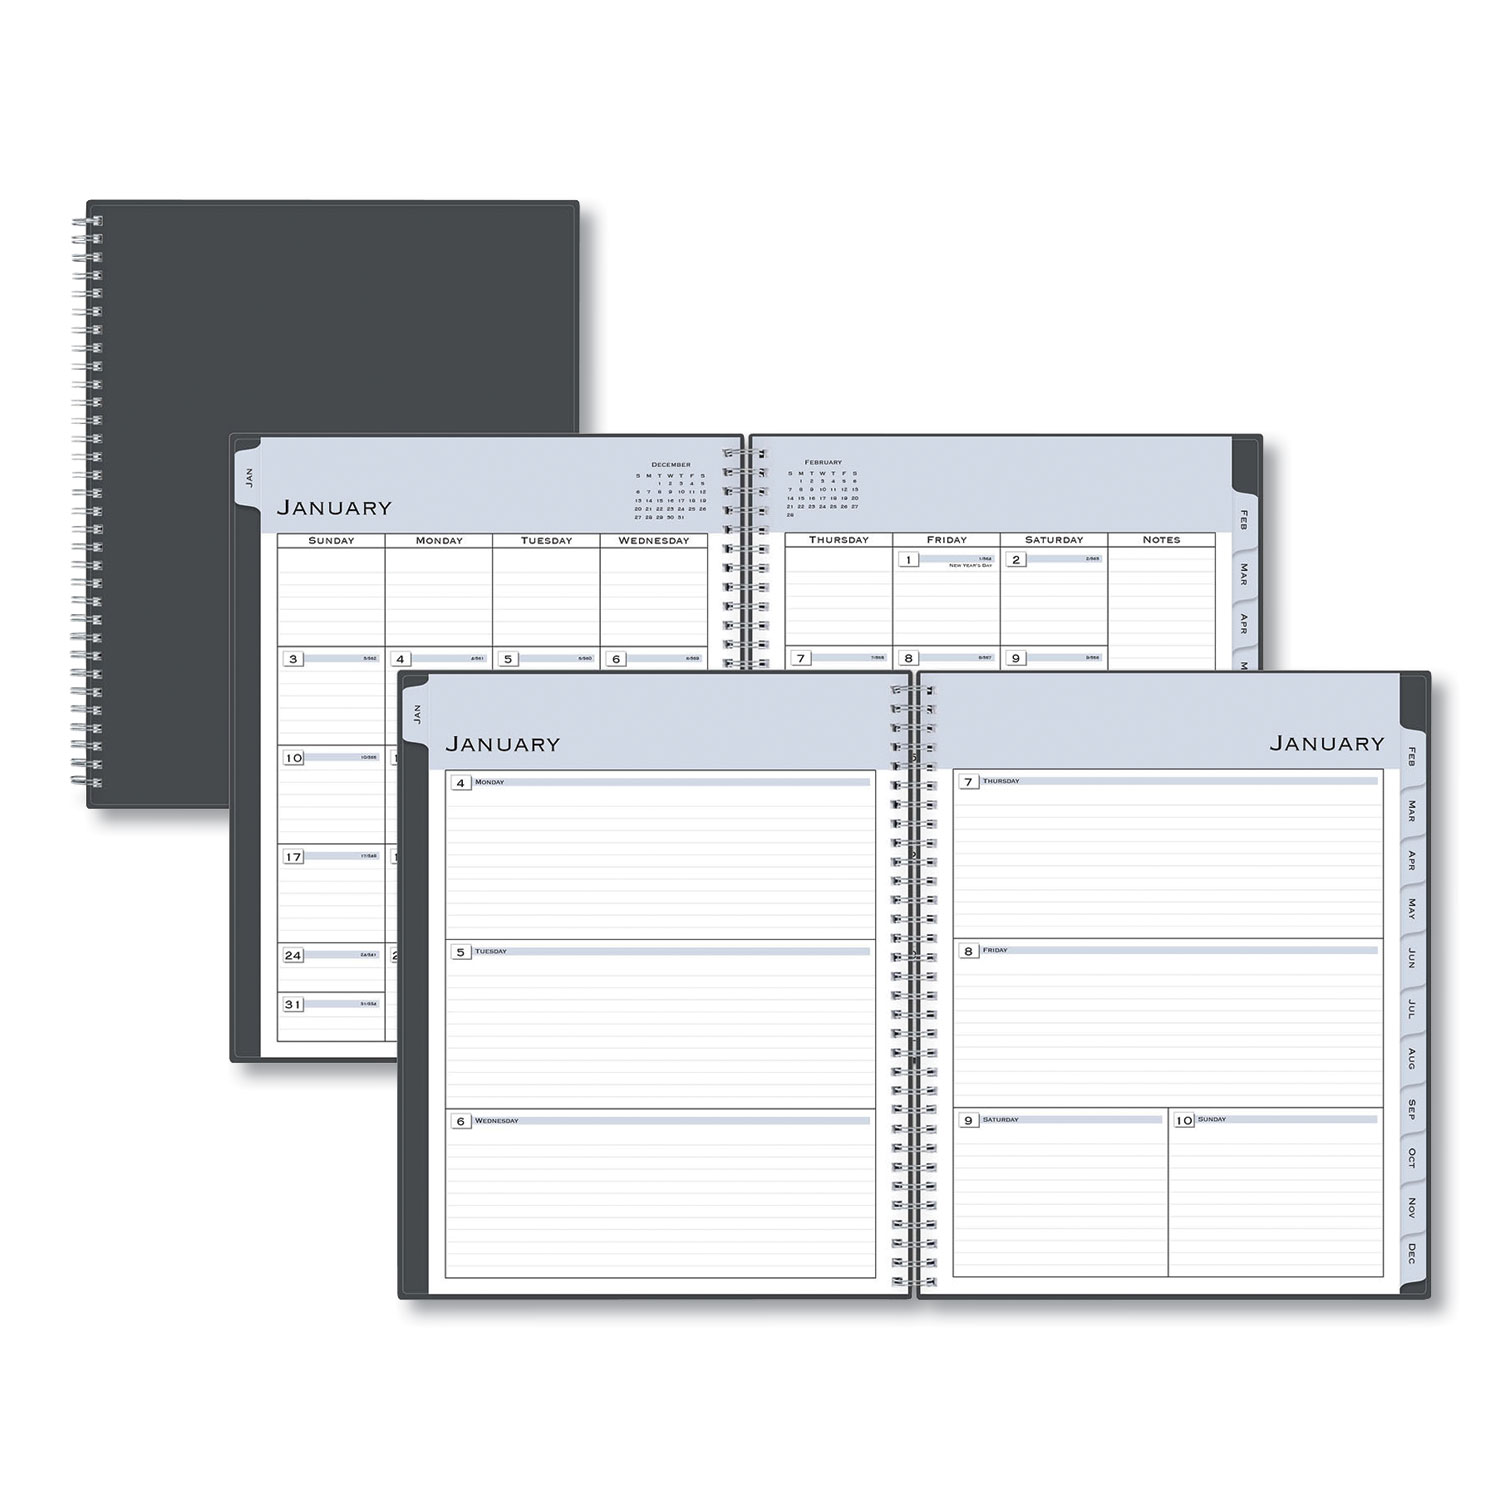  Blue Sky 100008 Passages Weekly/Monthly Wirebound Planner, 11 x 8 1/2, Charcoal, 2020 (BLS100008) 